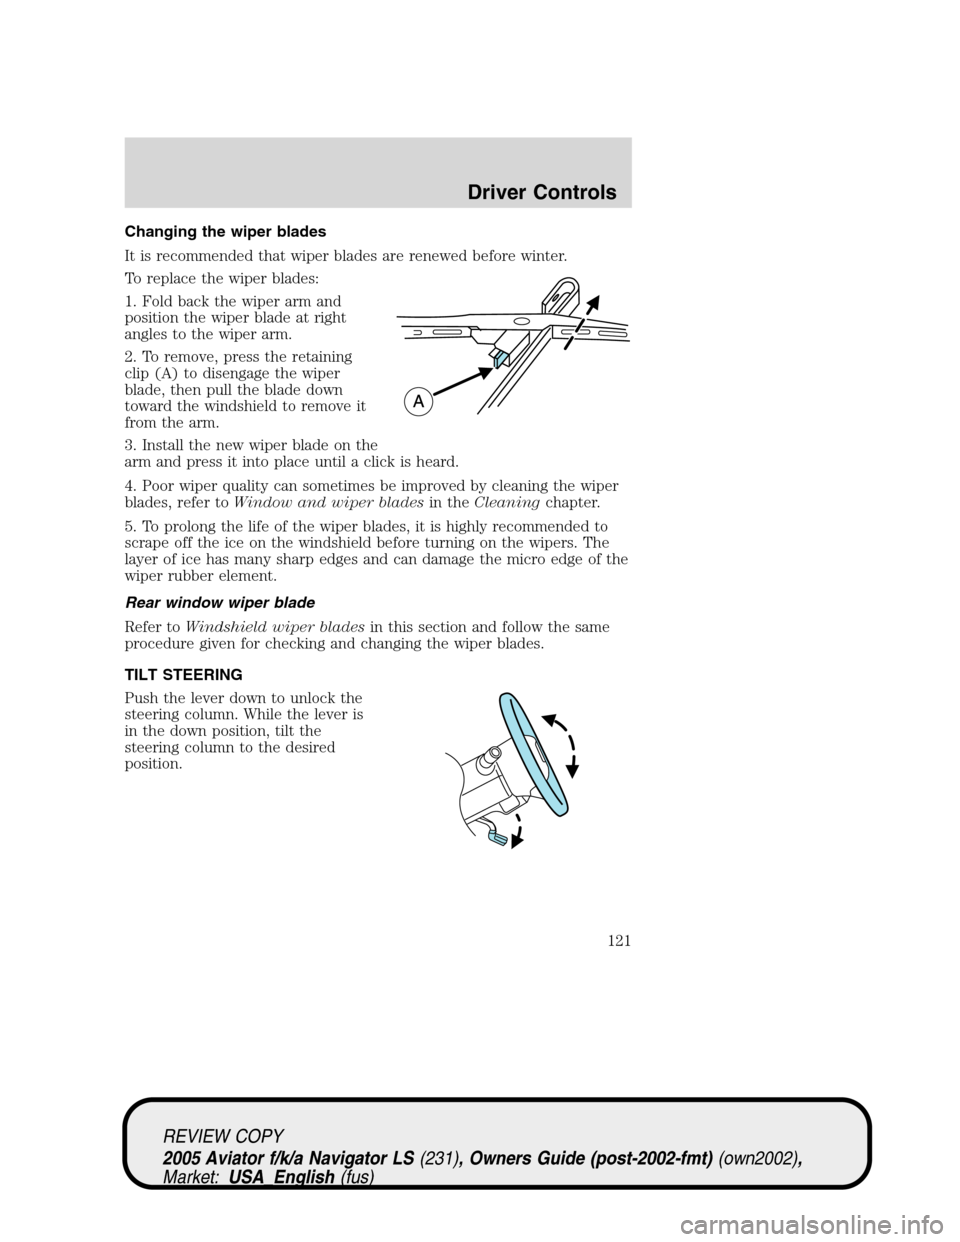 LINCOLN AVIATOR 2005  Owners Manual Changing the wiper blades
It is recommended that wiper blades are renewed before winter.
To replace the wiper blades:
1. Fold back the wiper arm and
position the wiper blade at right
angles to the wip